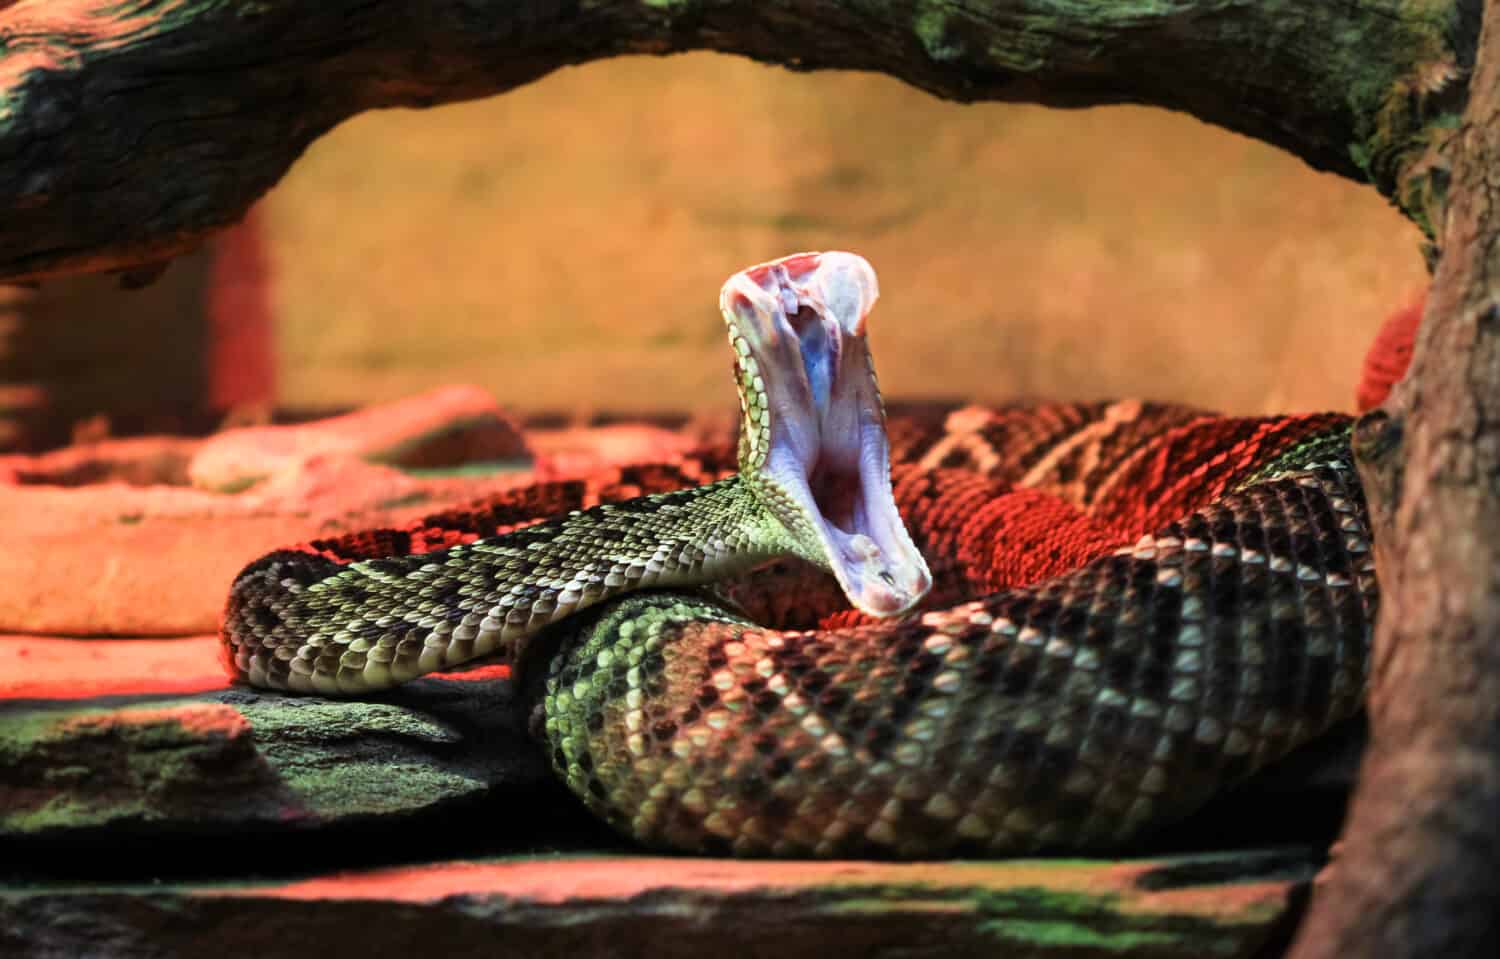 An eastern diamondback rattlesnake with its mouth open.